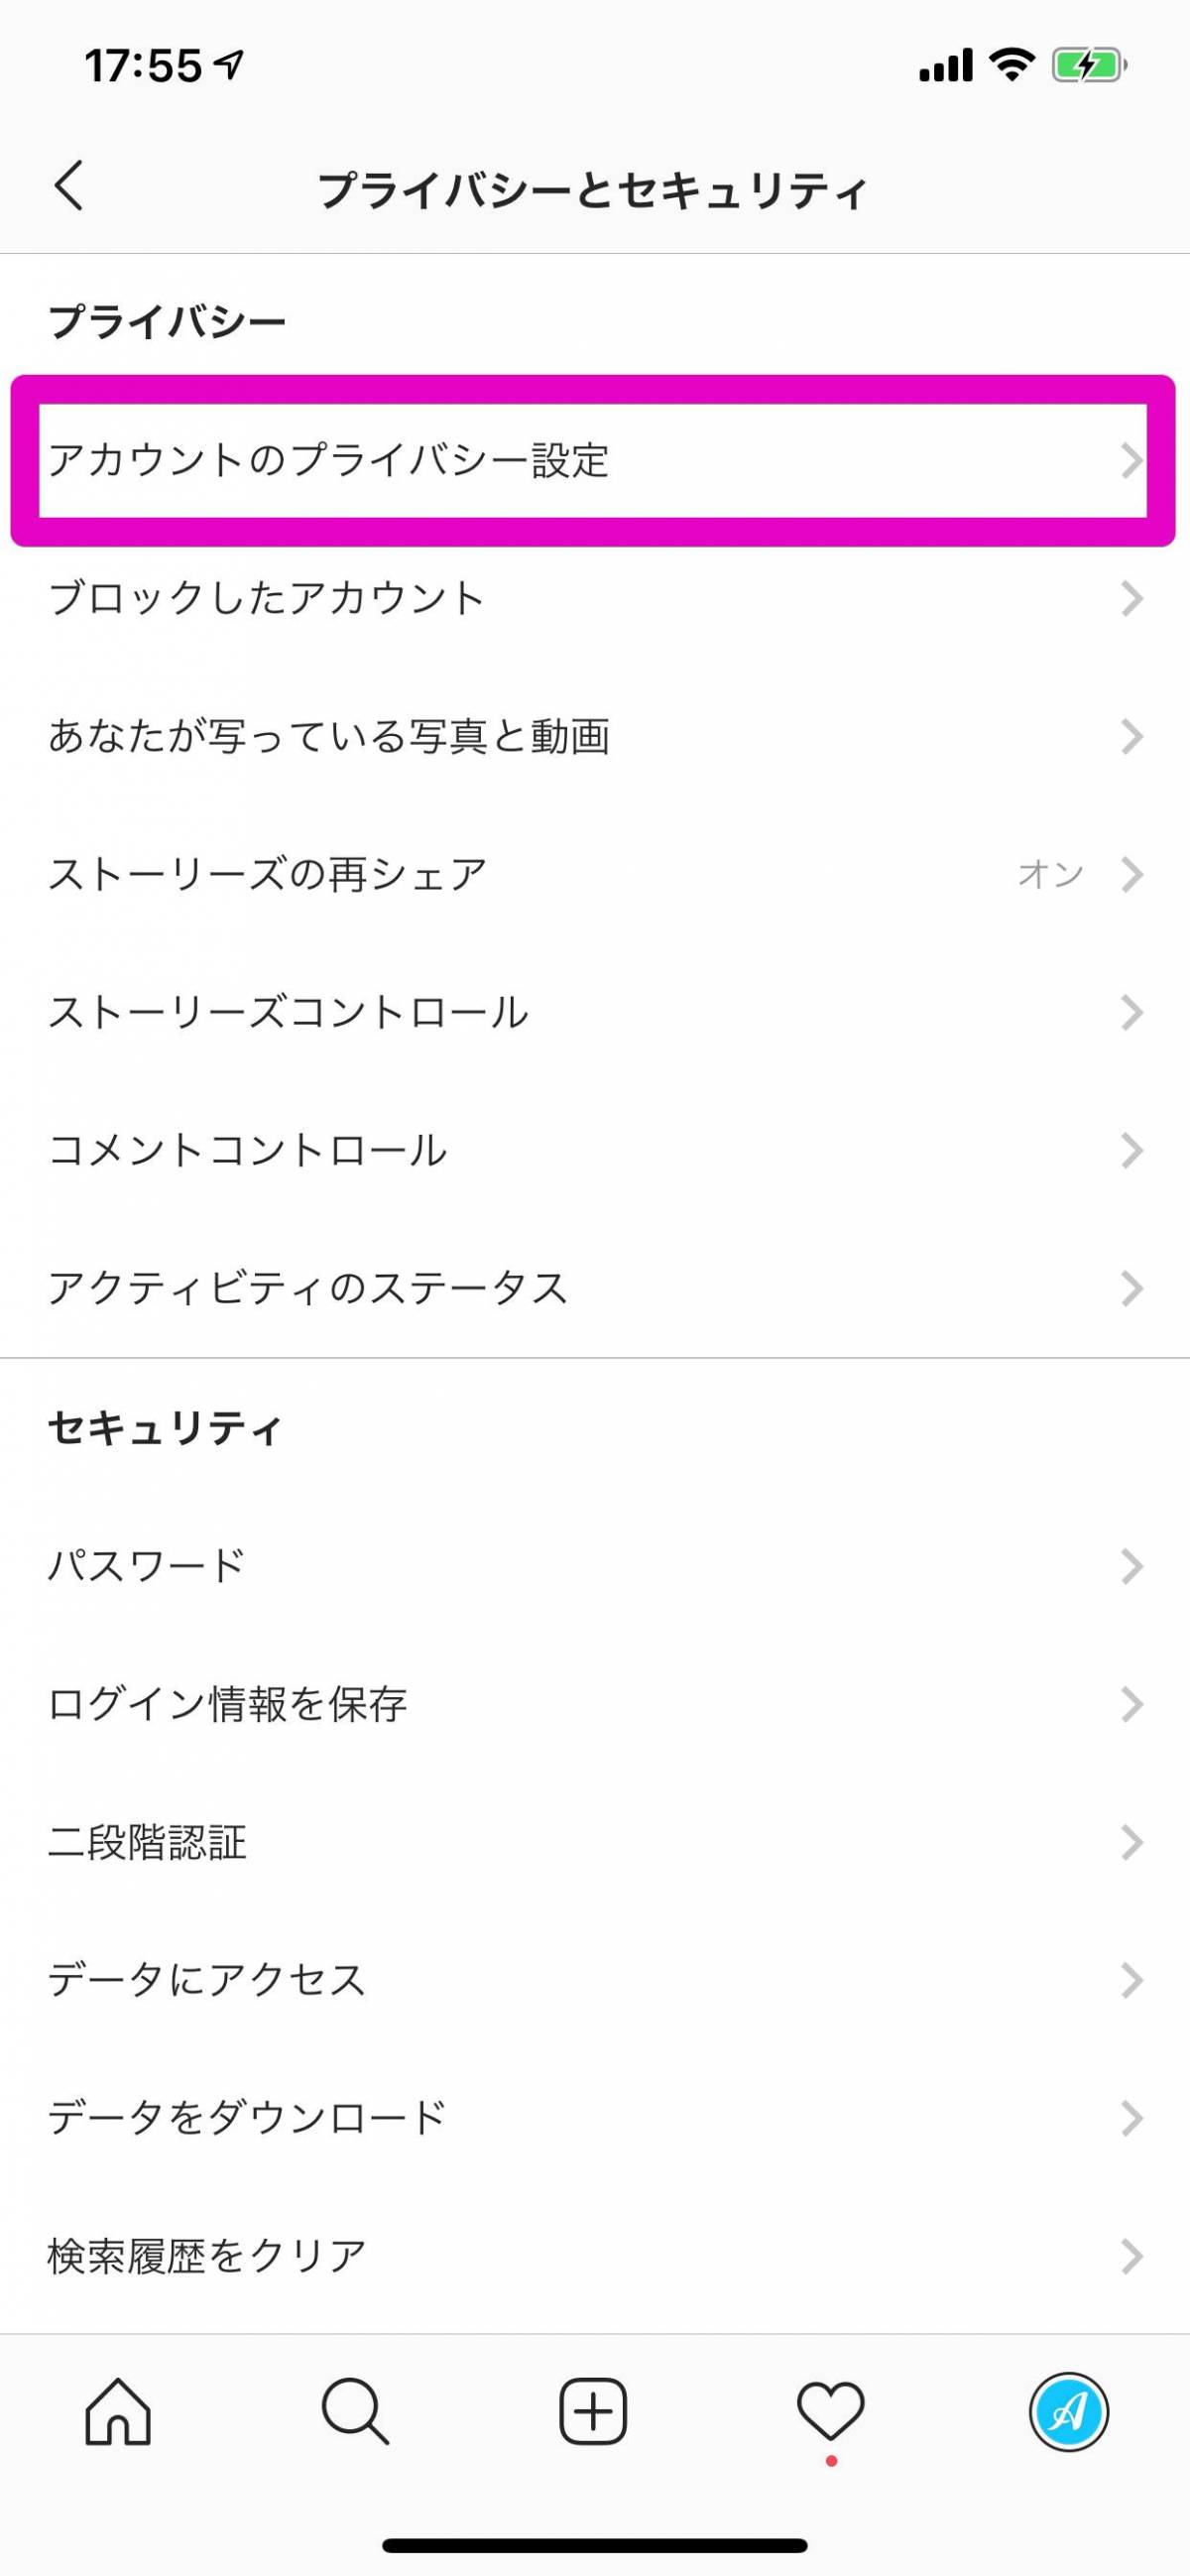 Instagram 非公開アカウント 鍵垢 の設定 解除方法 Iphone Android Pc Appliv Topics